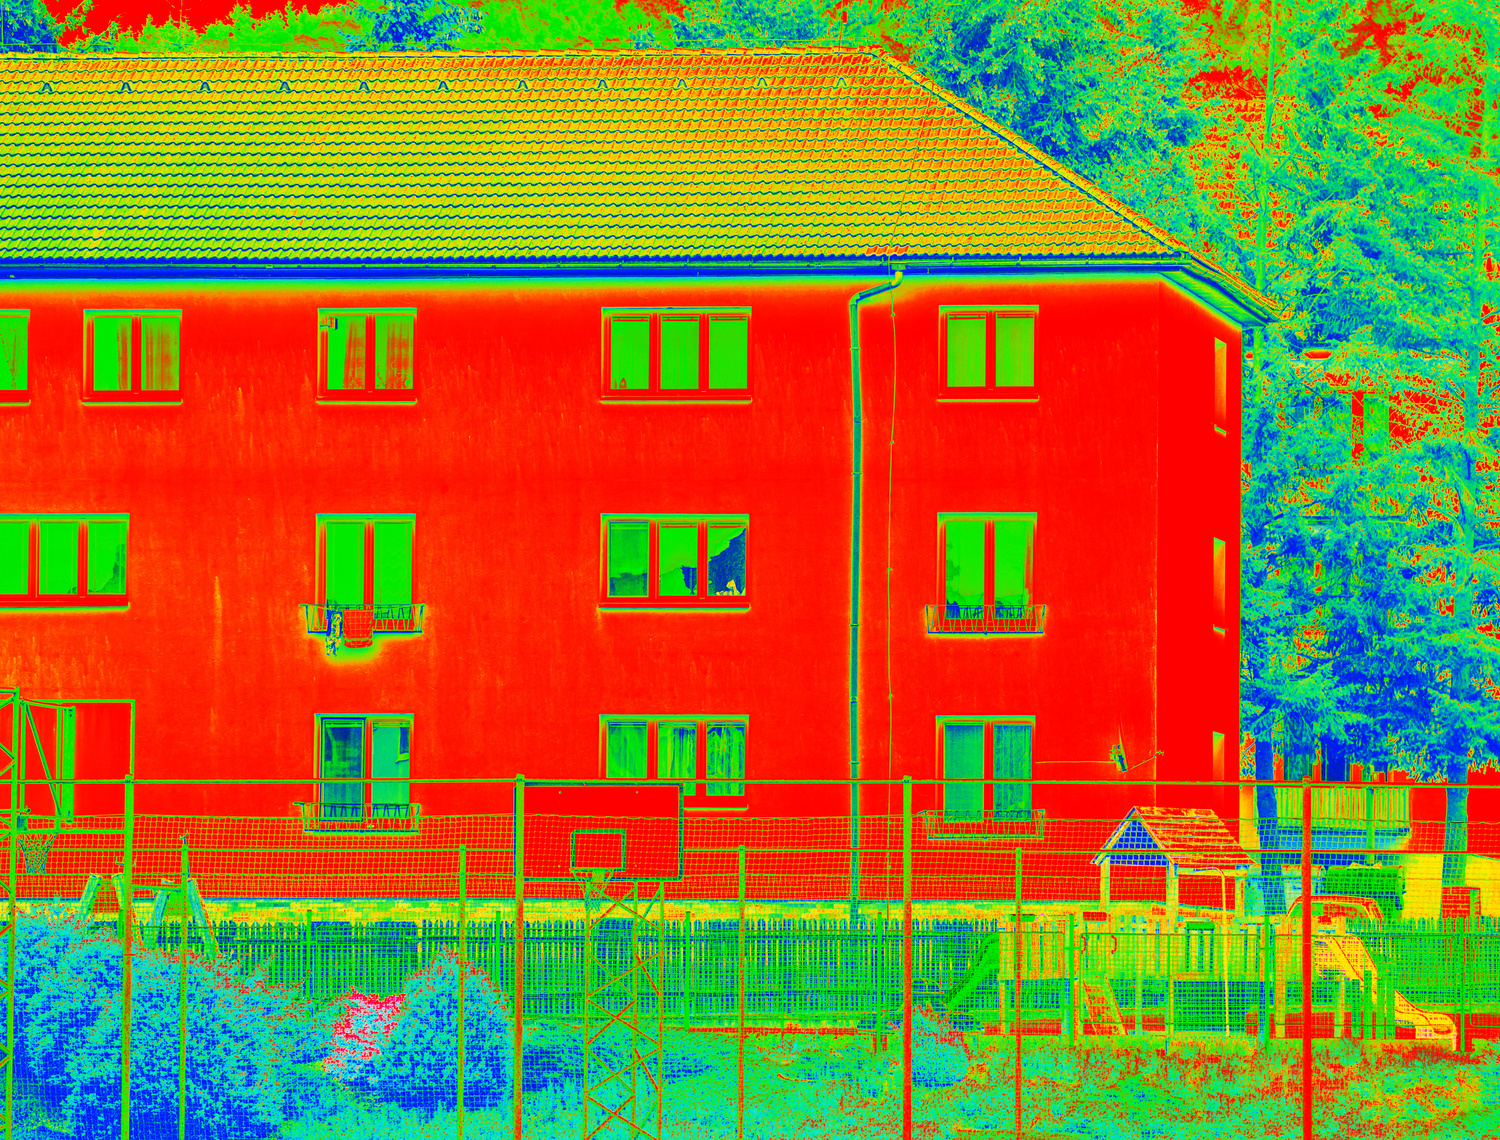 Infrared thermo vision shows thermal radiation from house